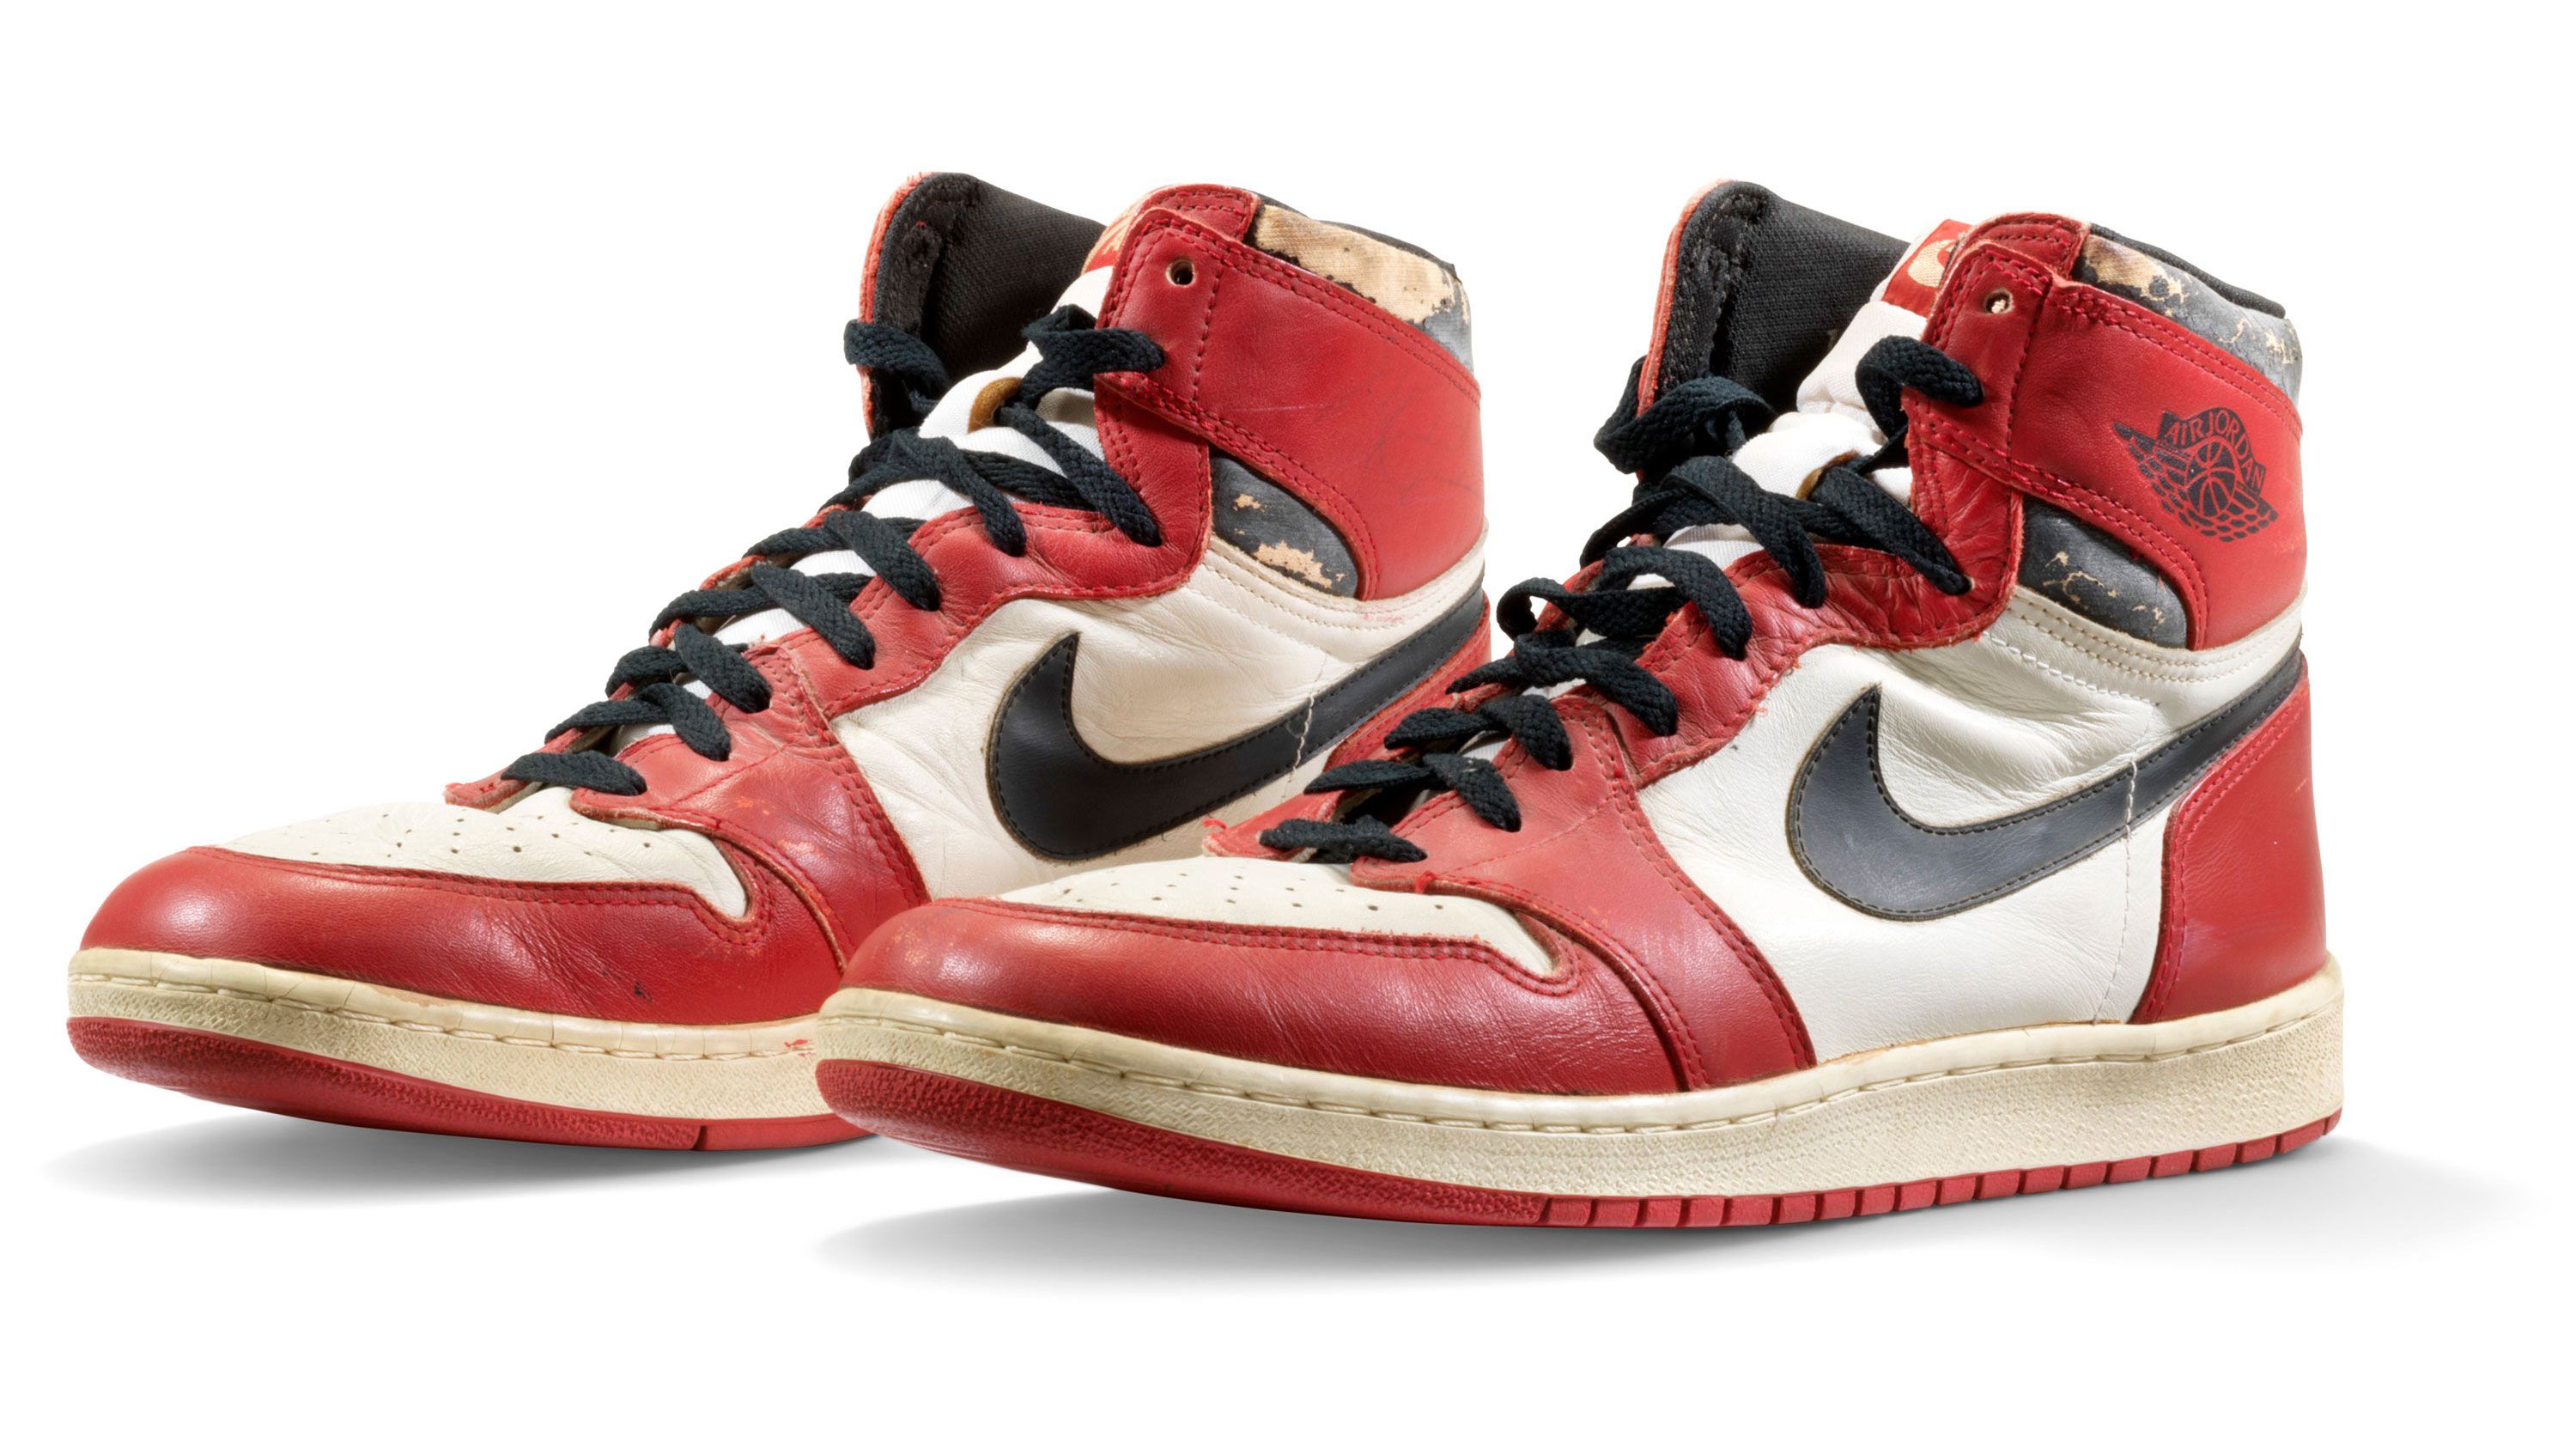 Michael Jordan Game-Worn Sneakers from Rookie Season Auction for